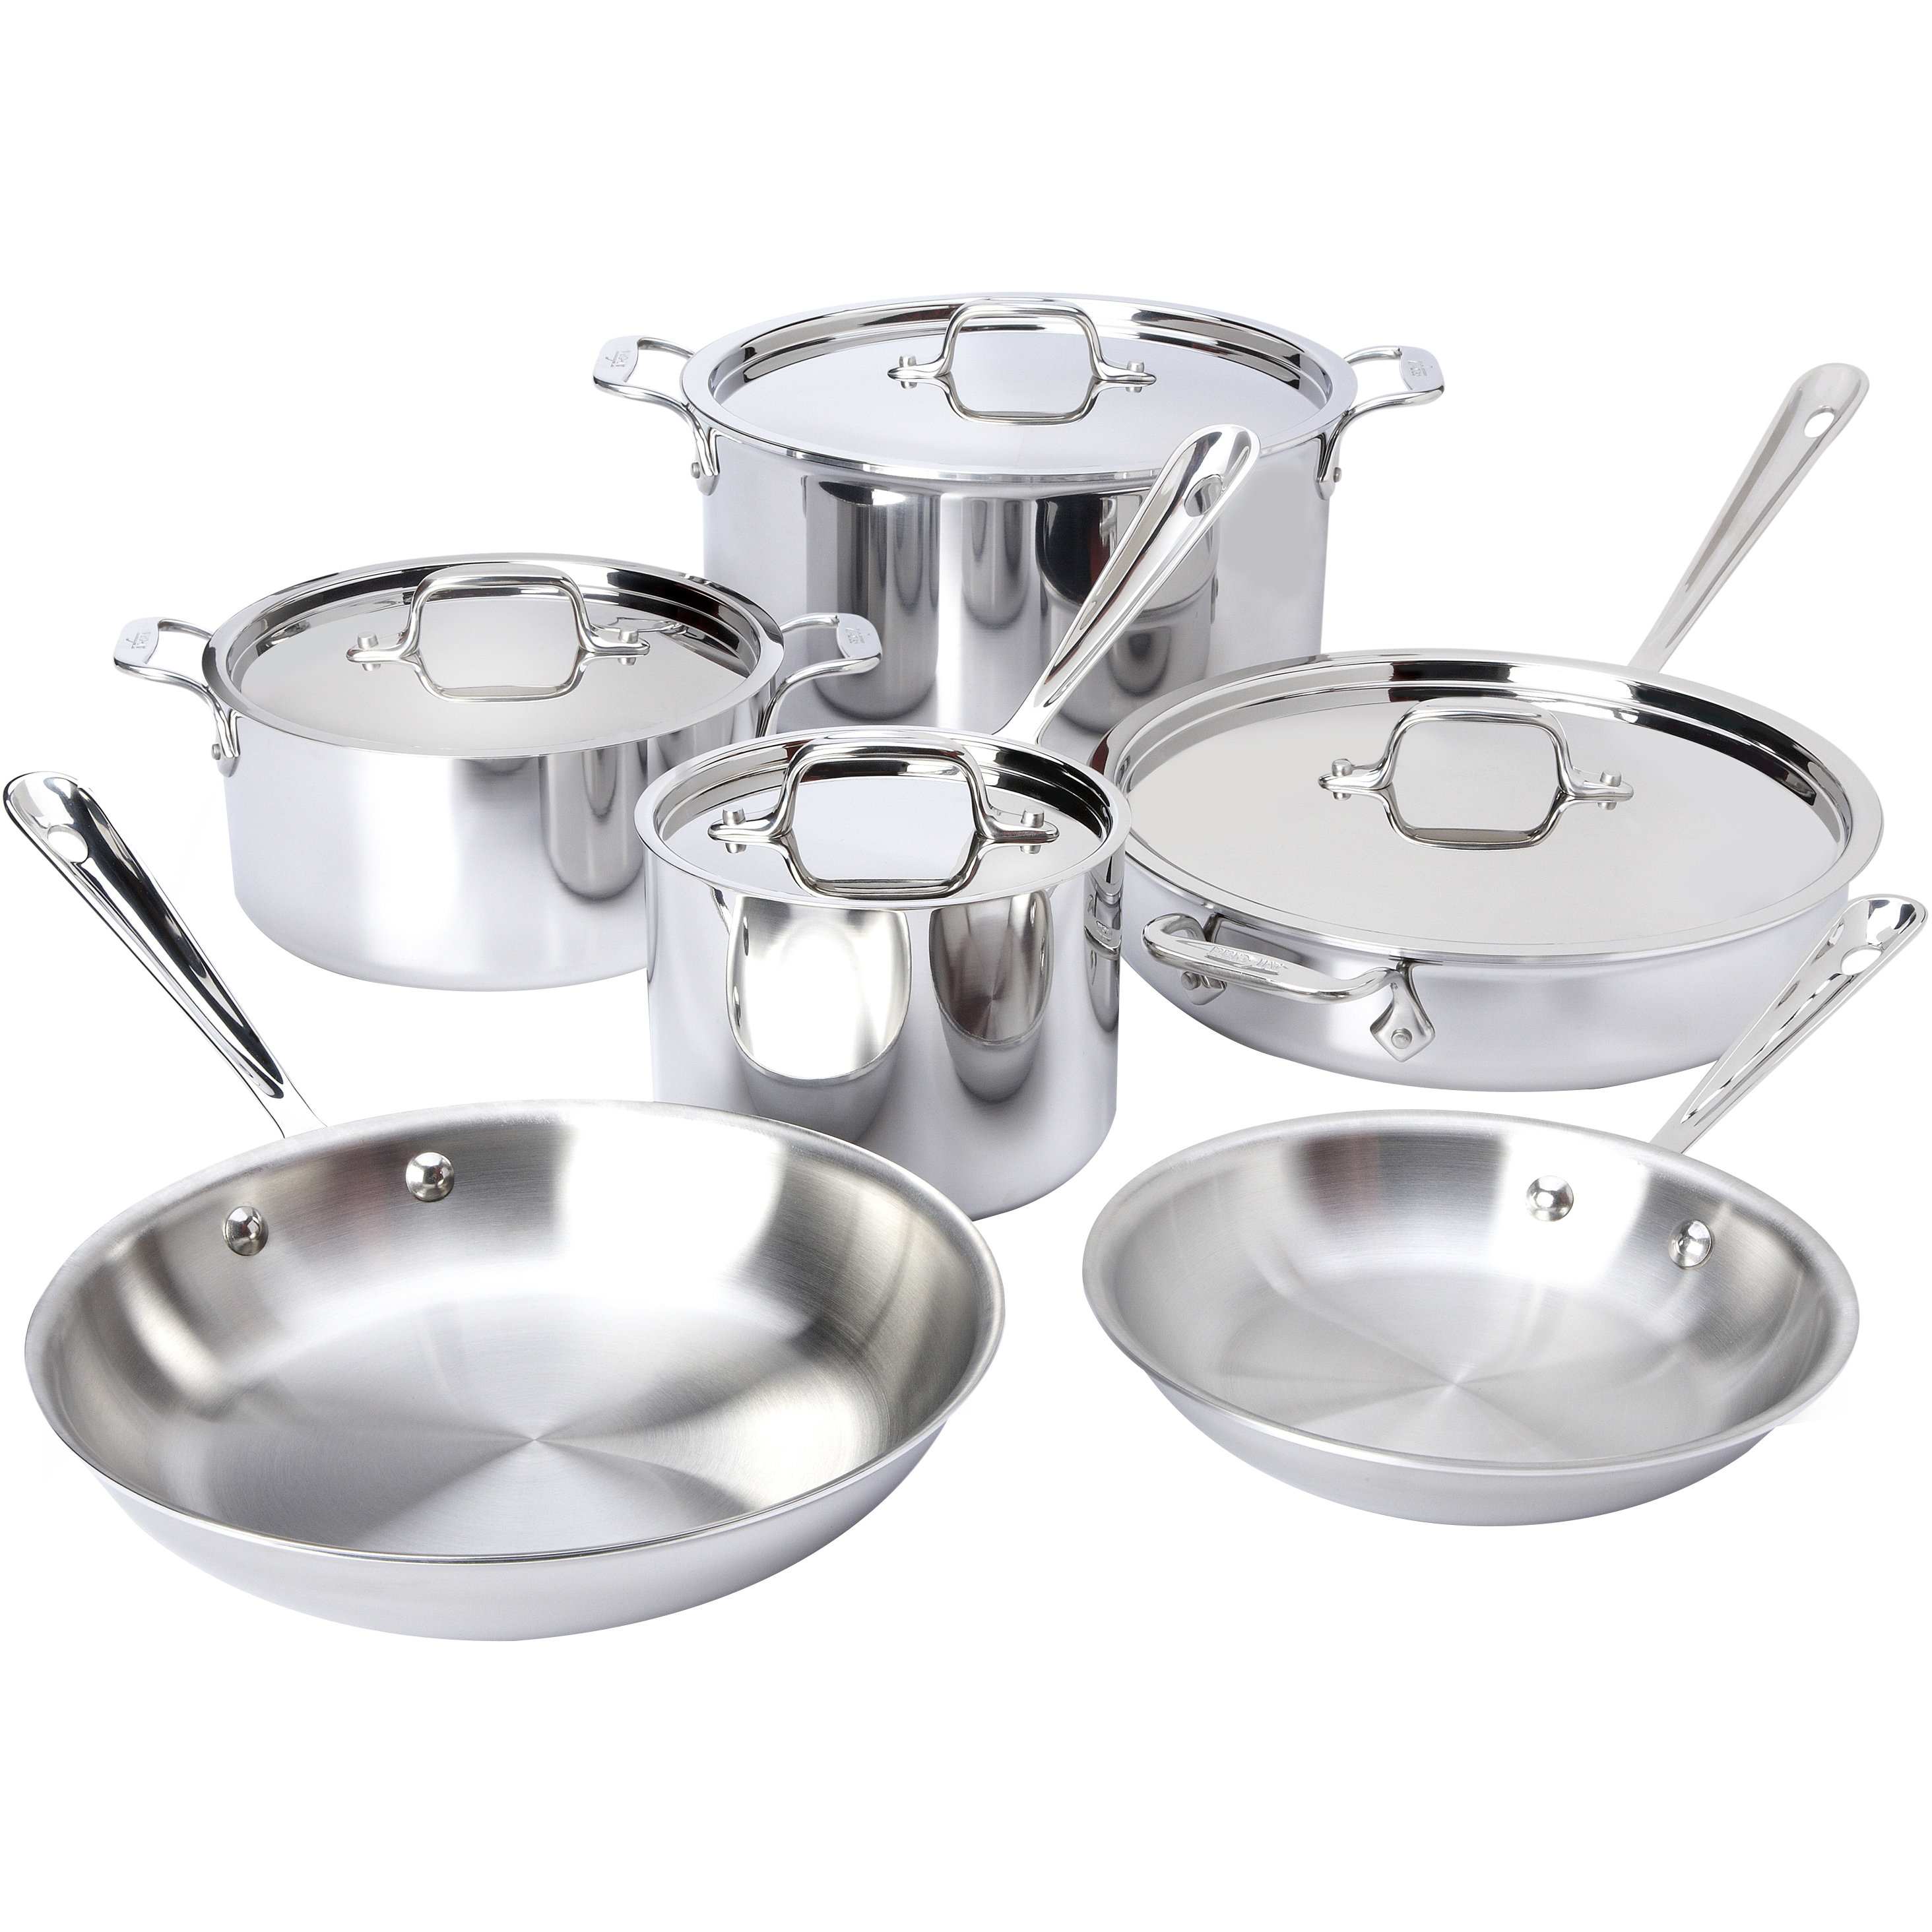 All-clad Stainless Steel Cookware Set 10-piece